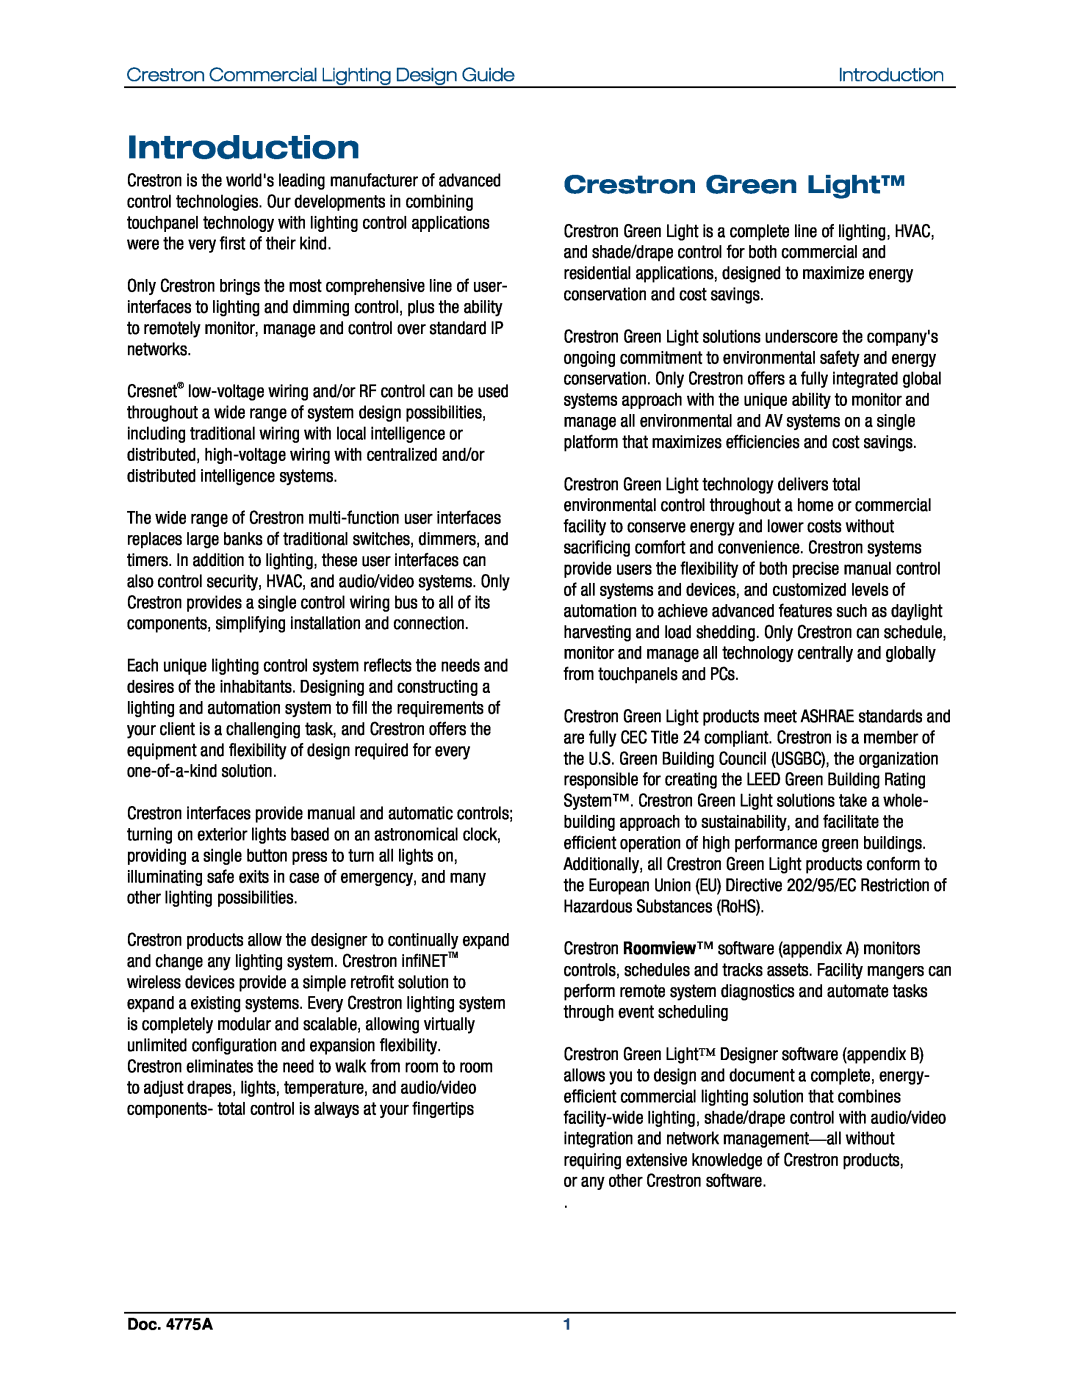 Crestron electronic GLPS-HSW-FT Introduction, Crestron Green Light, Crestron Commercial Lighting Design Guide, Doc. 4775A 